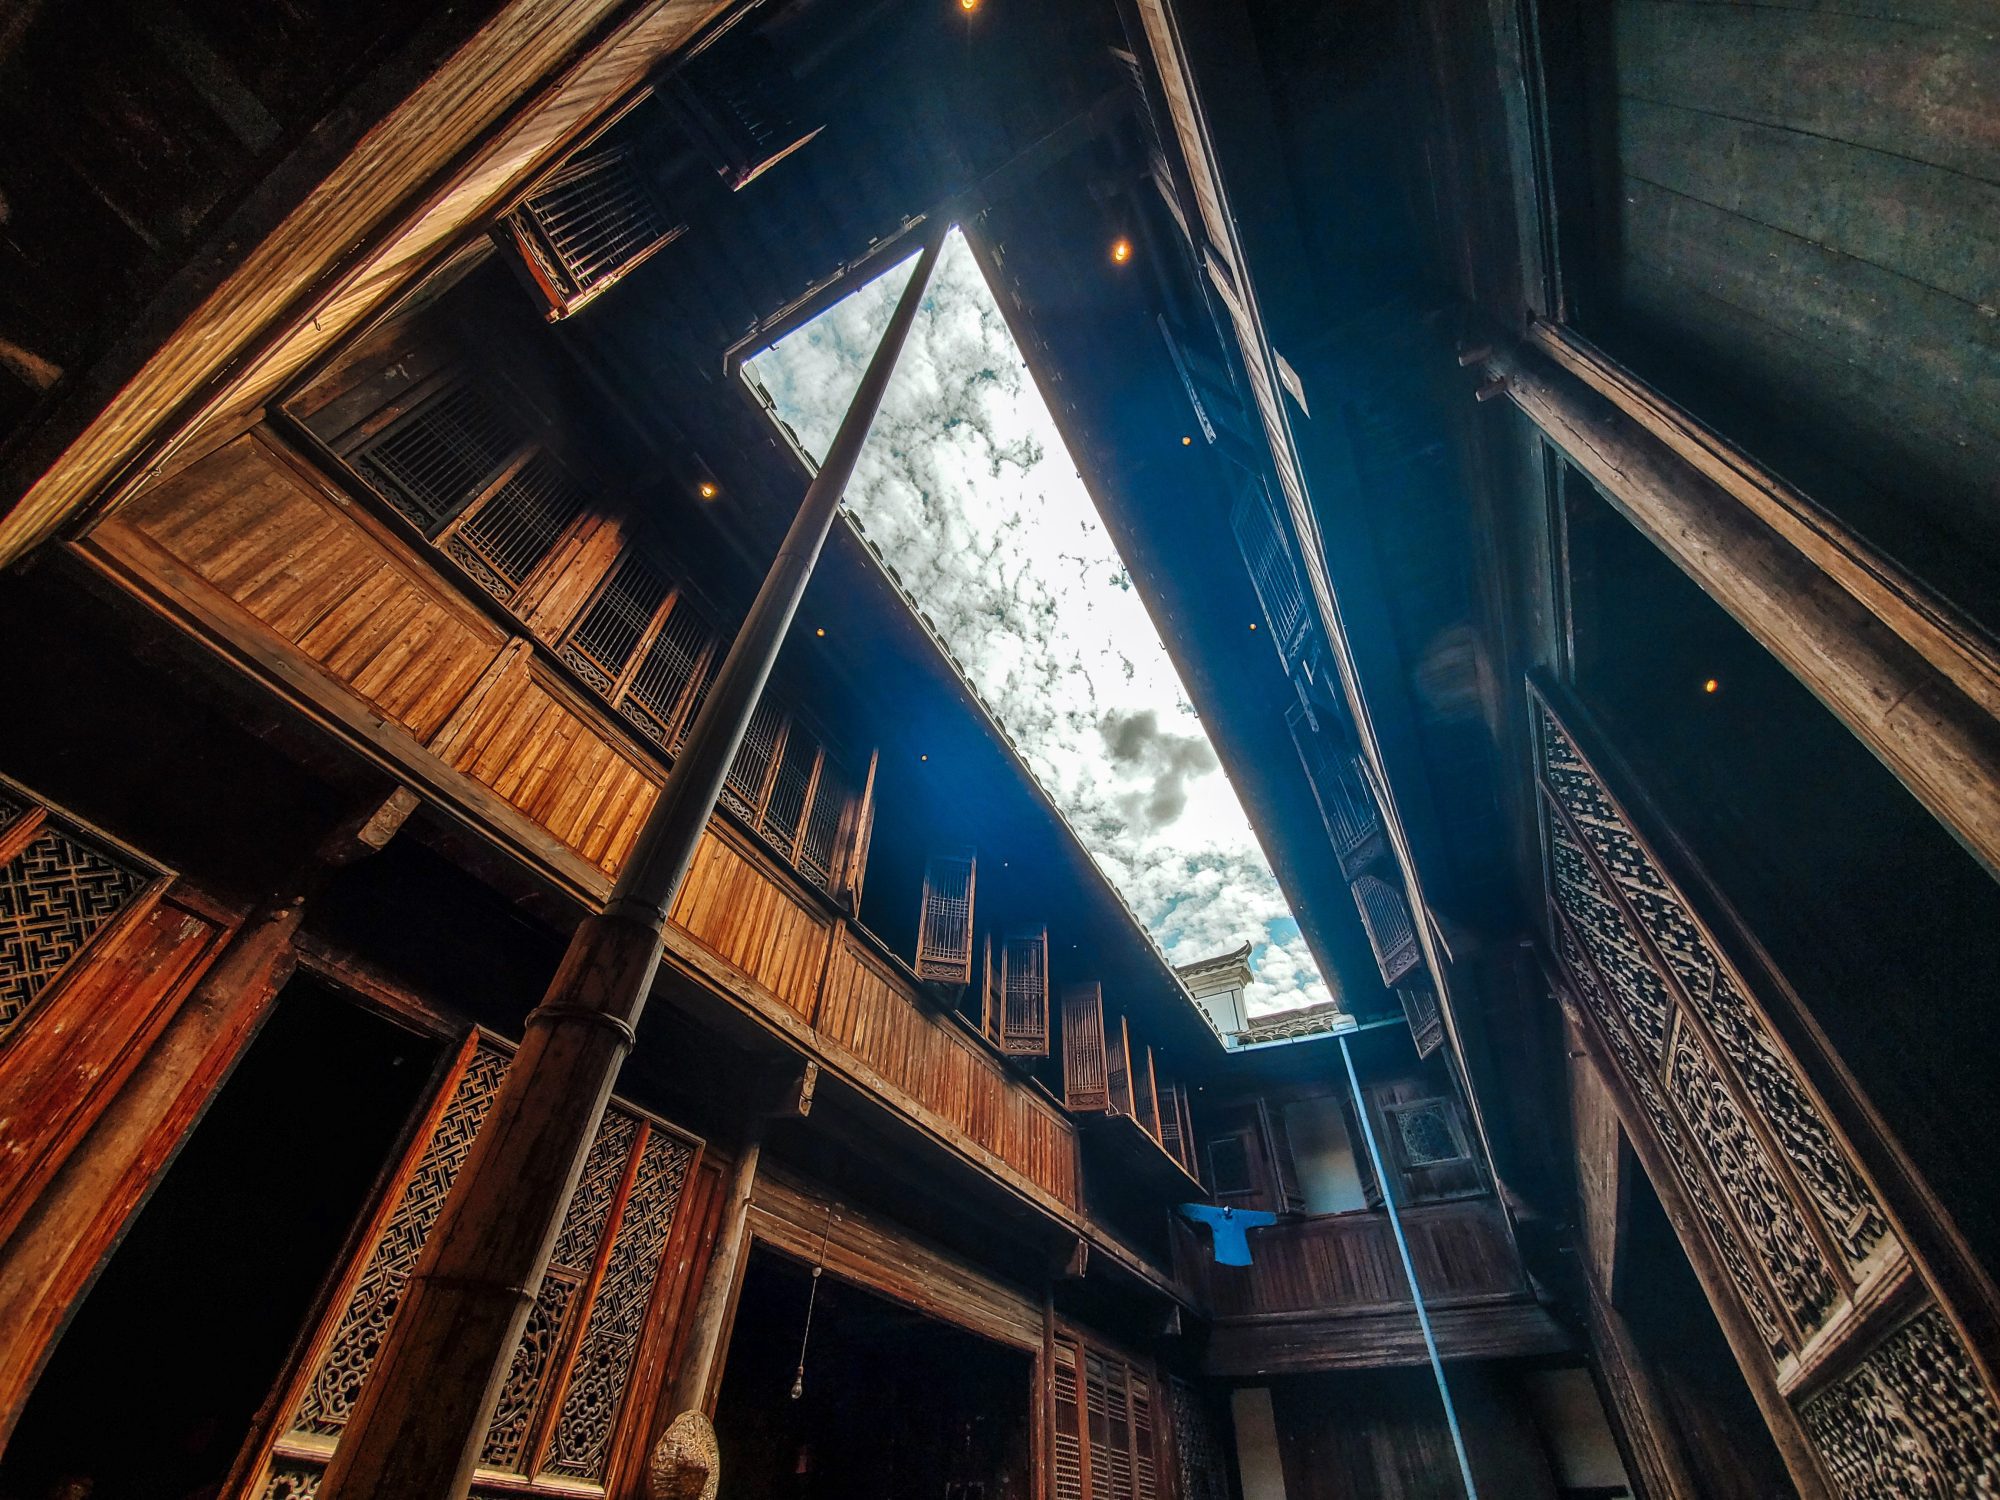 Experience the beauty of the sky peering through a gap in an elaborately designed traditional wooden structure.